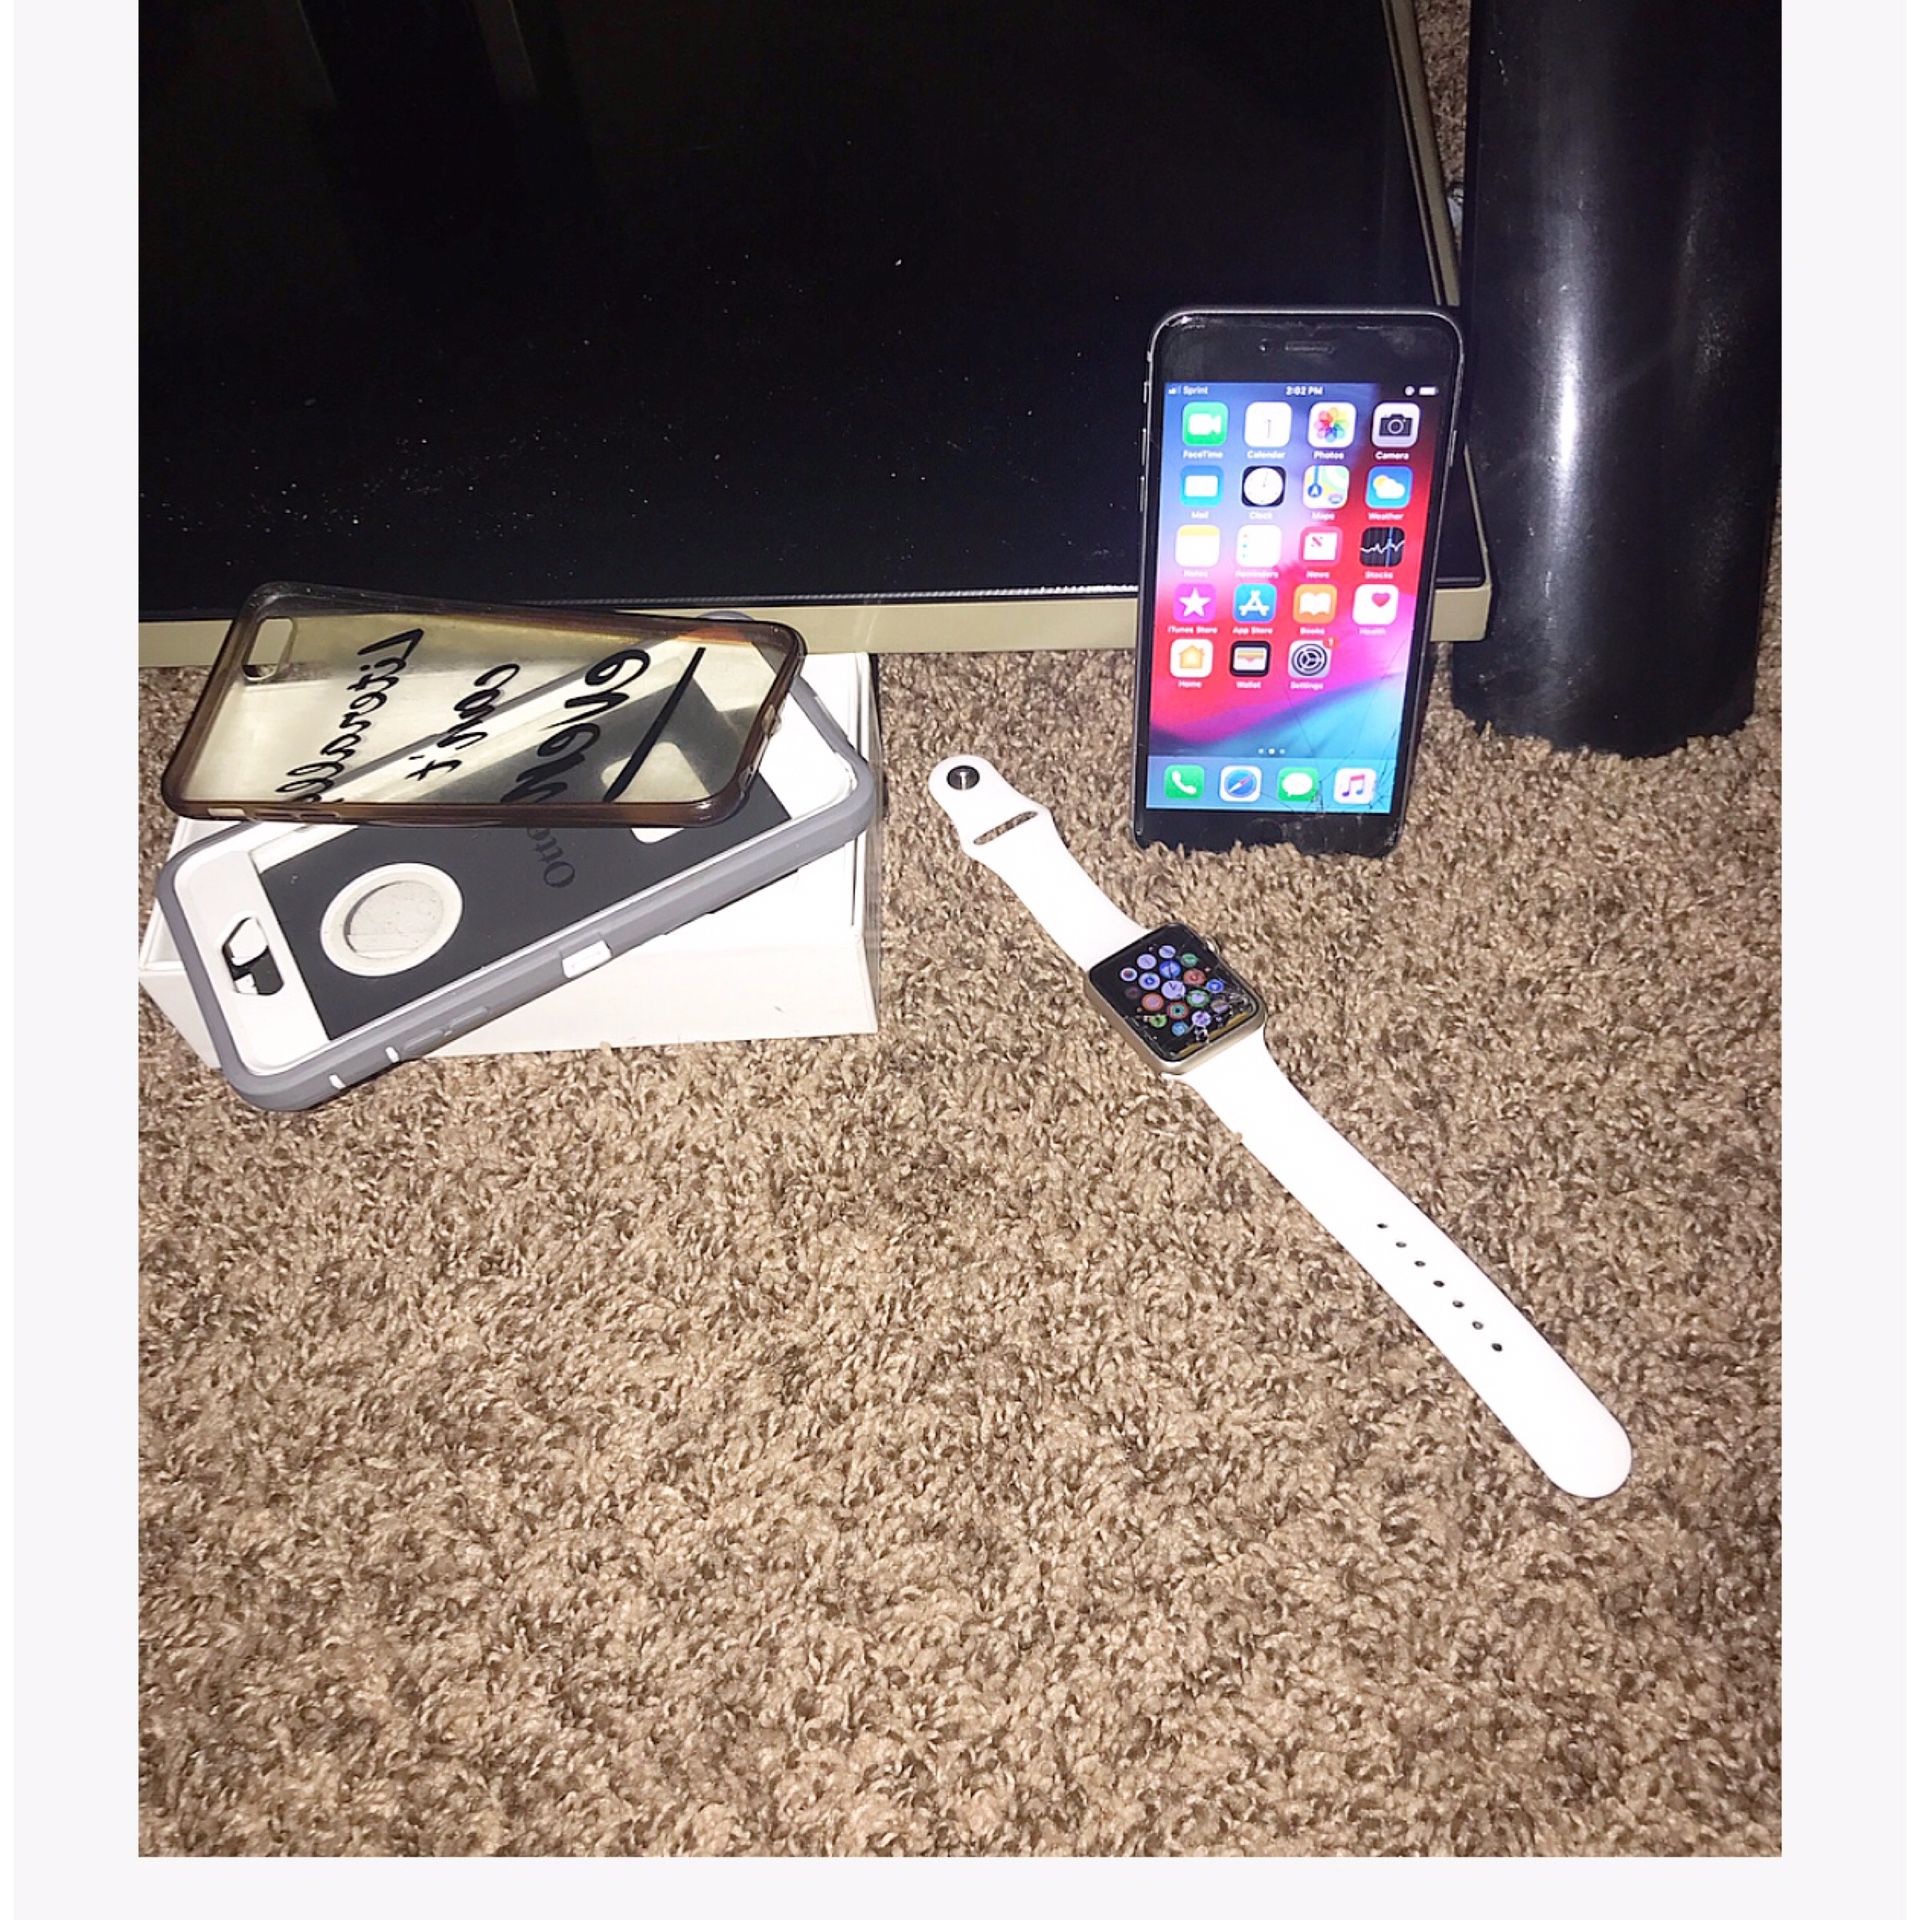 Apple Watch : 125 (obo)version 4.3.2 5GB w/ charger & 3 changeable bands IPhone 6s Plus 32 GB (small cracks) Sprint network $175(unlocked)